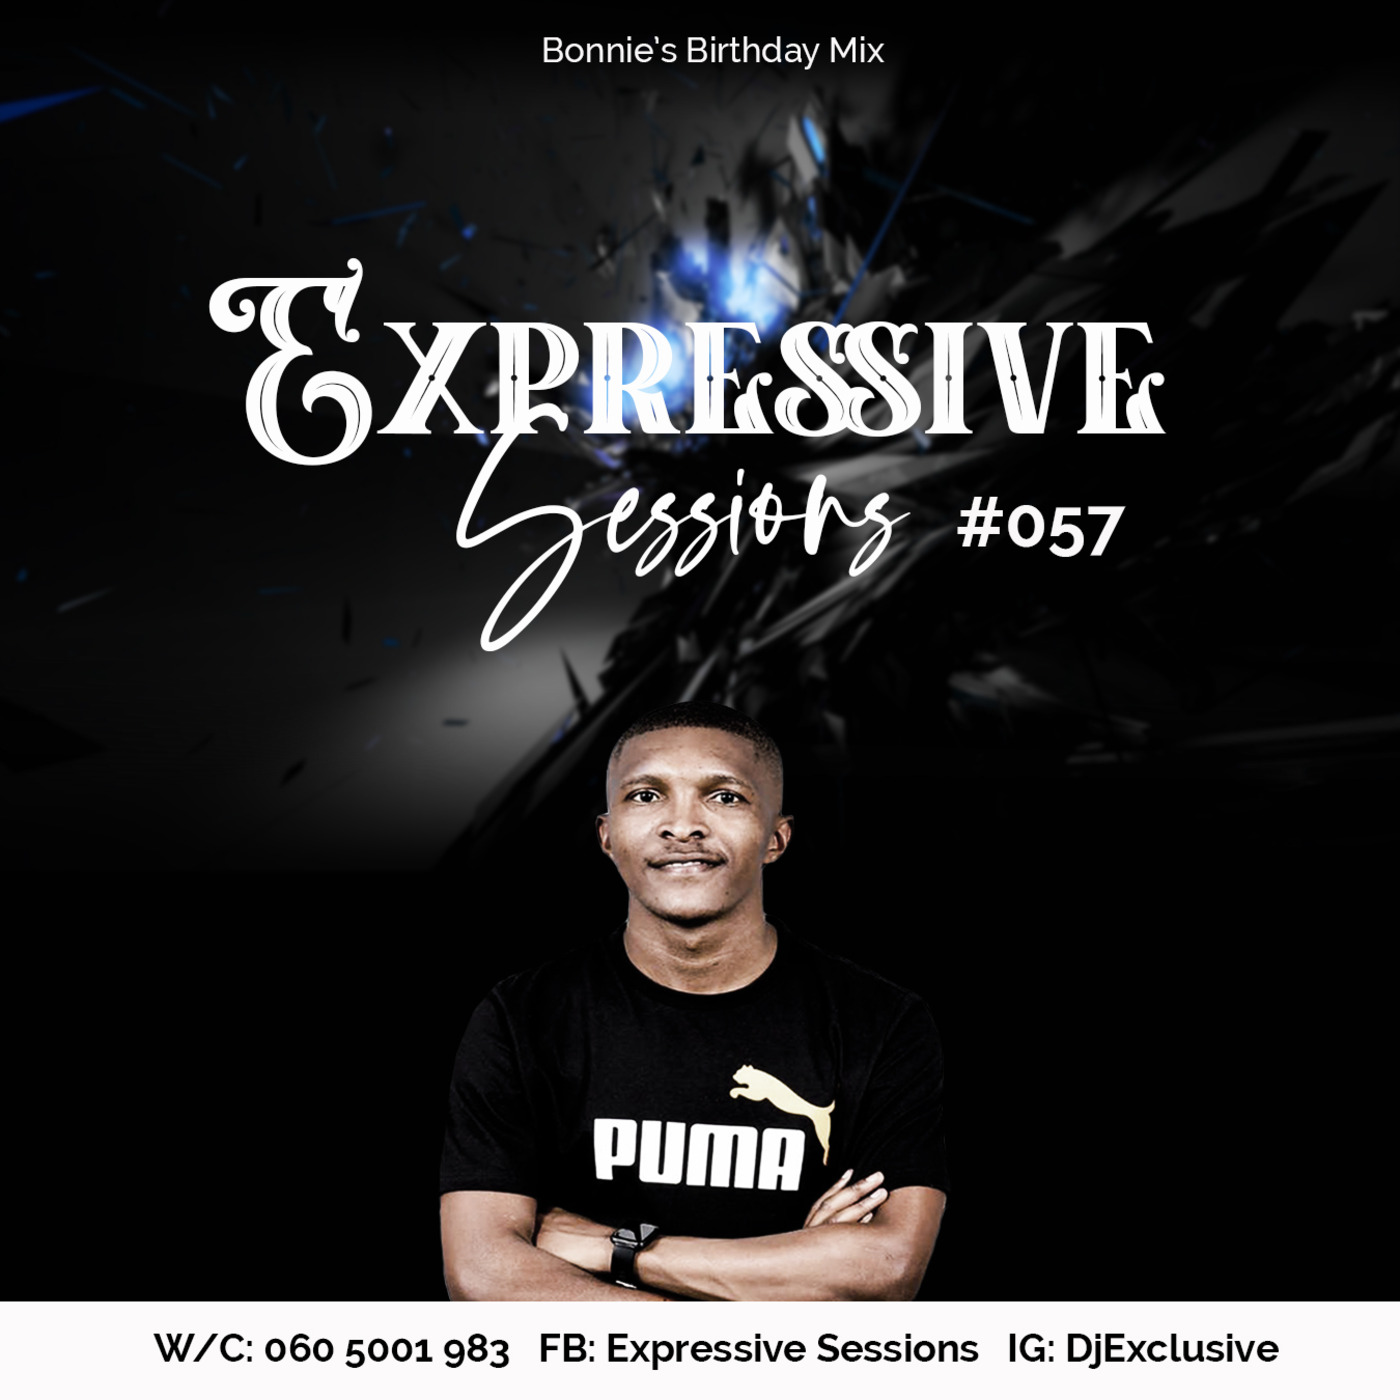 Expressive Sessions #057 Mixed By Benni Exclusive (Bonnie's Birthday Mix)